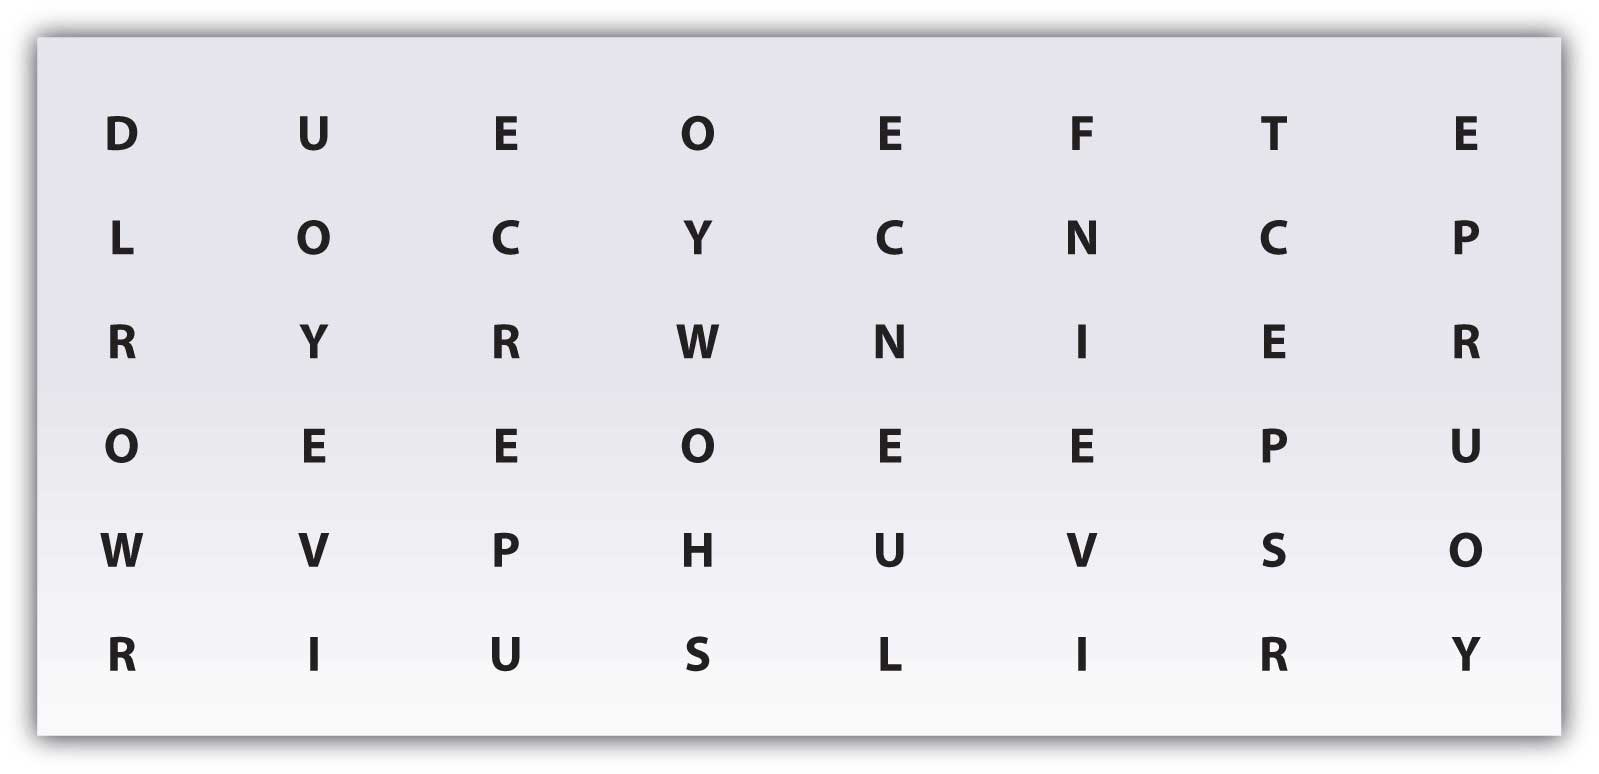 A hidden message in a table of of letters